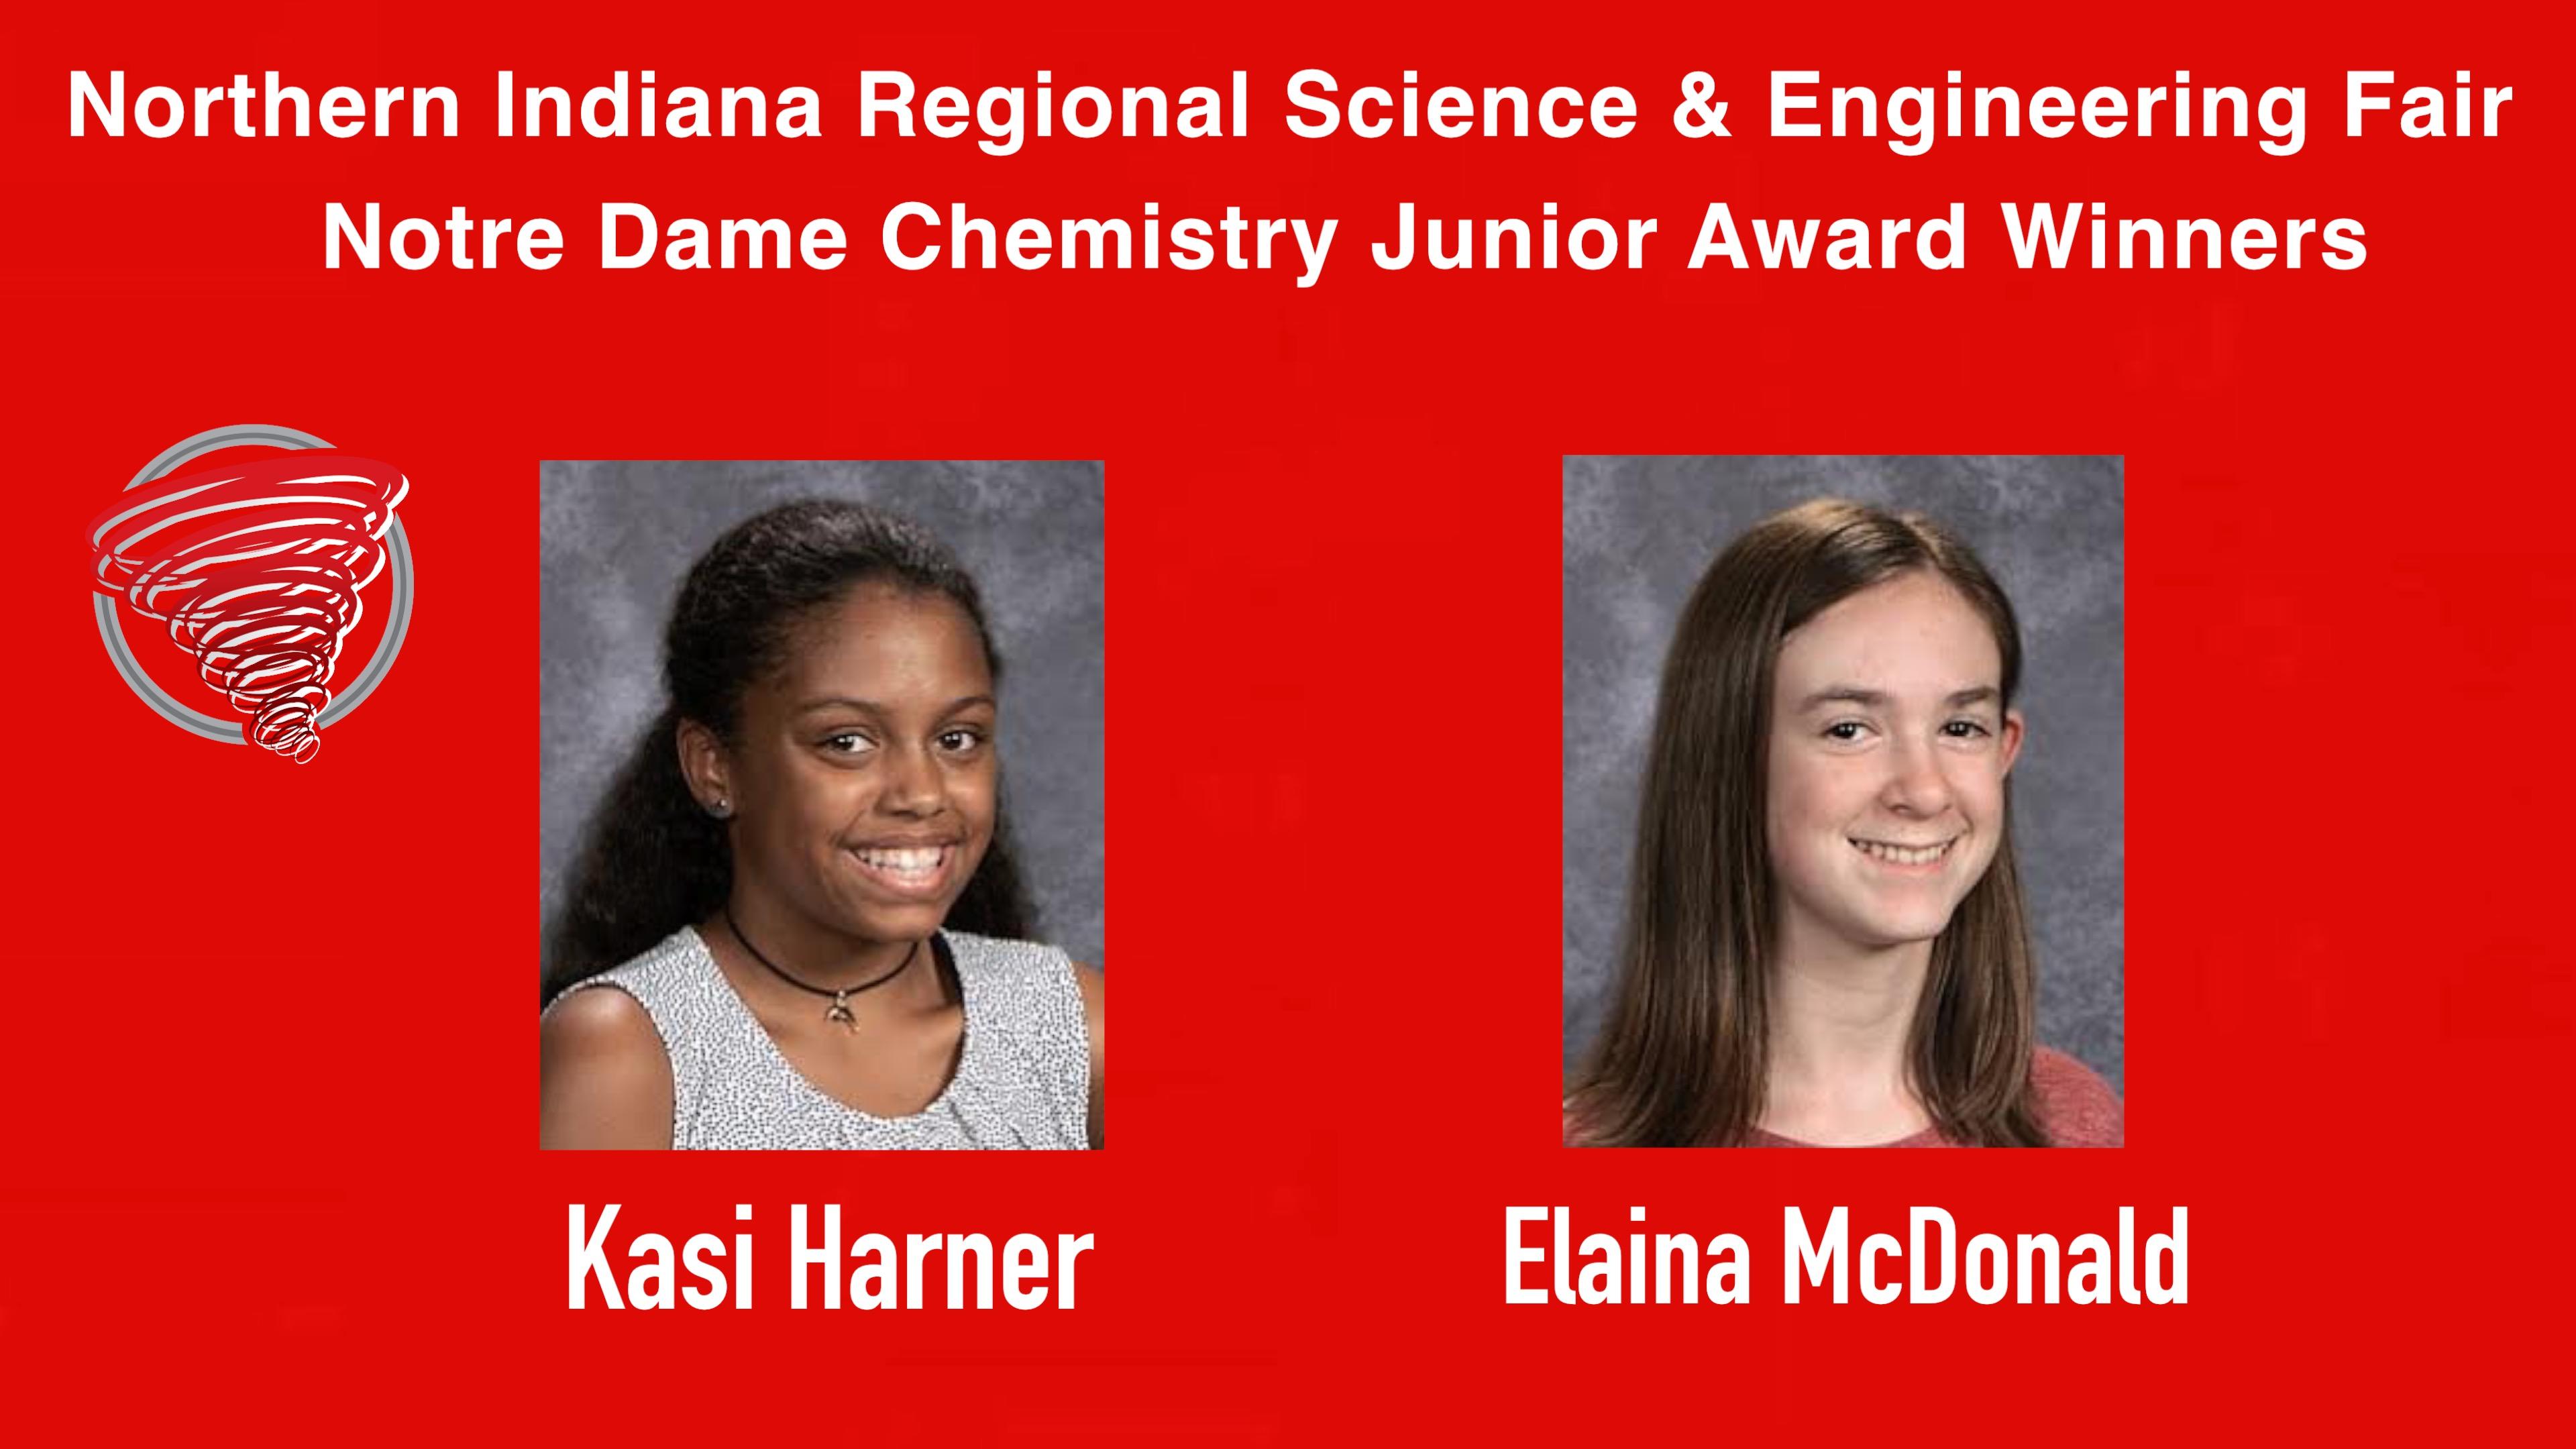 Lincoln Jr. High School students Kasi Harner and Elaina McDonald were both awarded the Notre Dame Chemistry Junior award at the Northern Indiana Regional Science and Engineering Fair